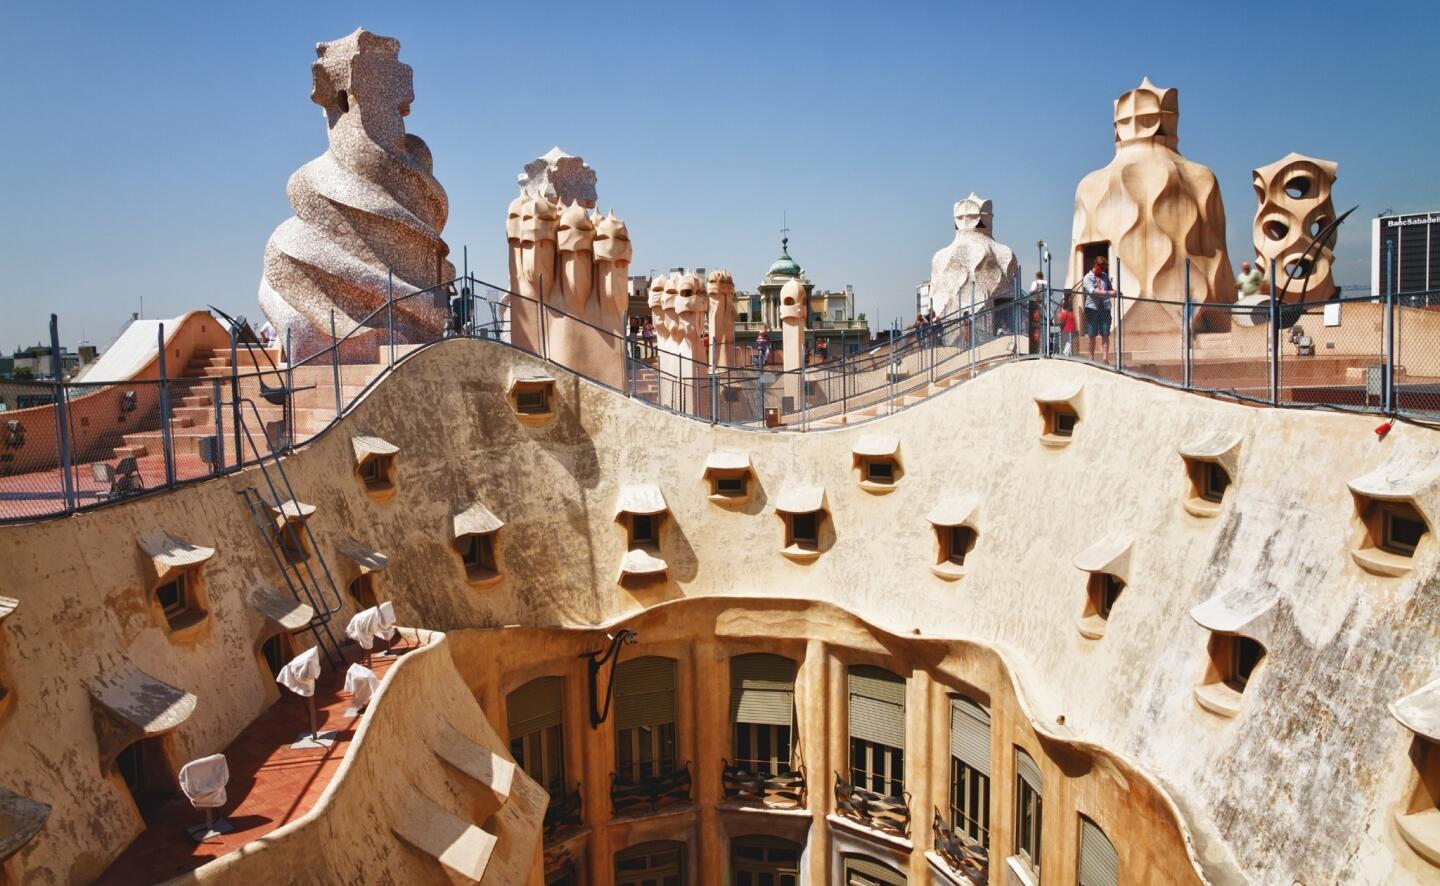 Catalonia's free-thinking architects, artists and sculptors transformed the very concept of what a building, a sculpture or a painting can and should be. Case in point: the abstract chimneys of Casa Mila (La Pedrera), in Barcelona, Spain. La Pedrera was built in 1906-1910 by the most famous Catalan architect, Antoni Gaudi. Starting in Barcelona — with its grand avenues punctuated by striking modernista landmarks — and venturing further afield, visitors can go right to the inspirations for Catalonia’s renegade artists.